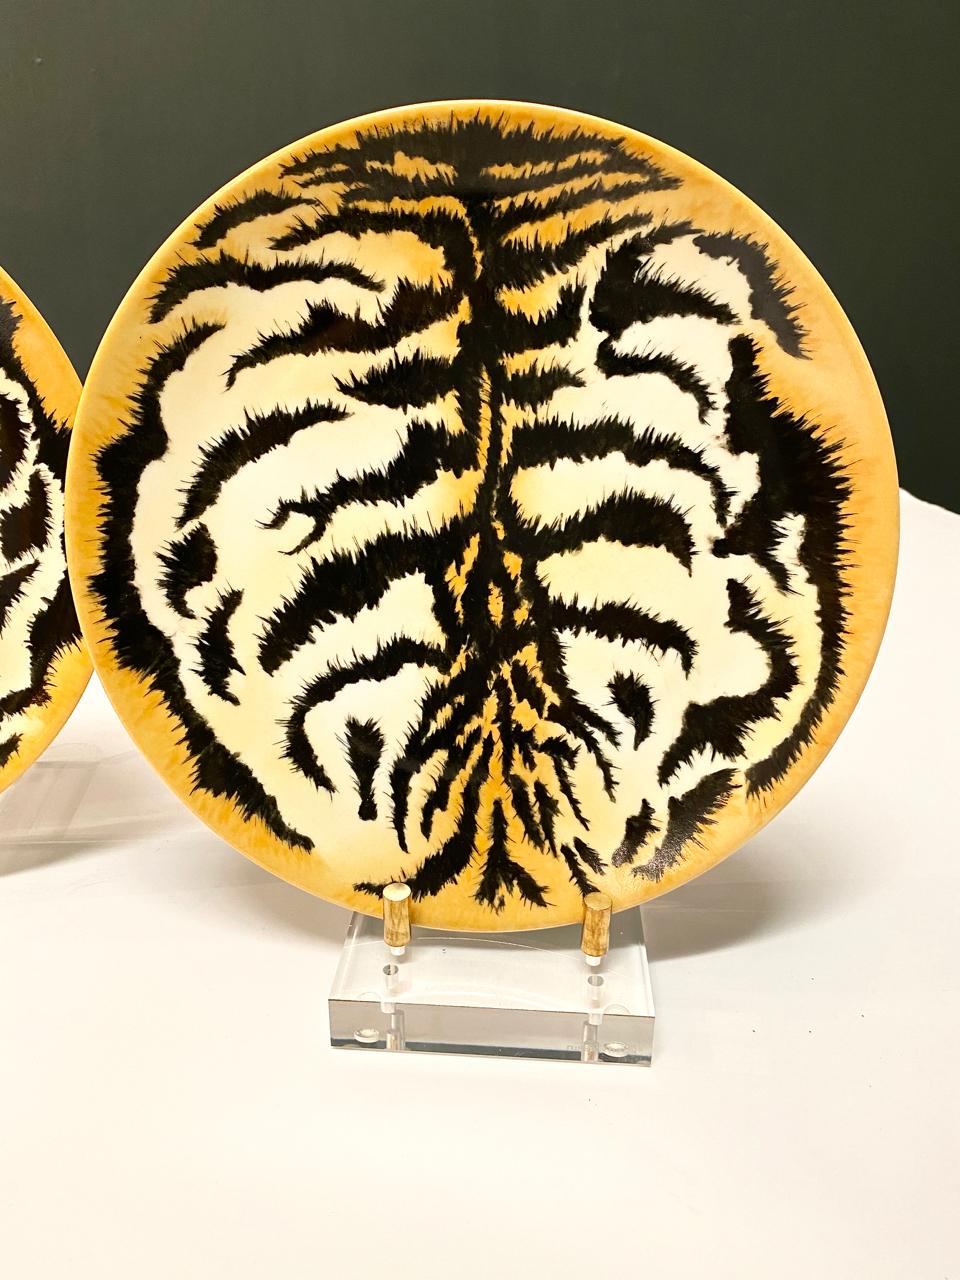 This is a highly decorative set of signed 9 dinner plates hand painted by the well-respected Odette de Bumiere, Palm Beach, 1988. These hand painted tiger plates would make a statement when hung together as a grouping.